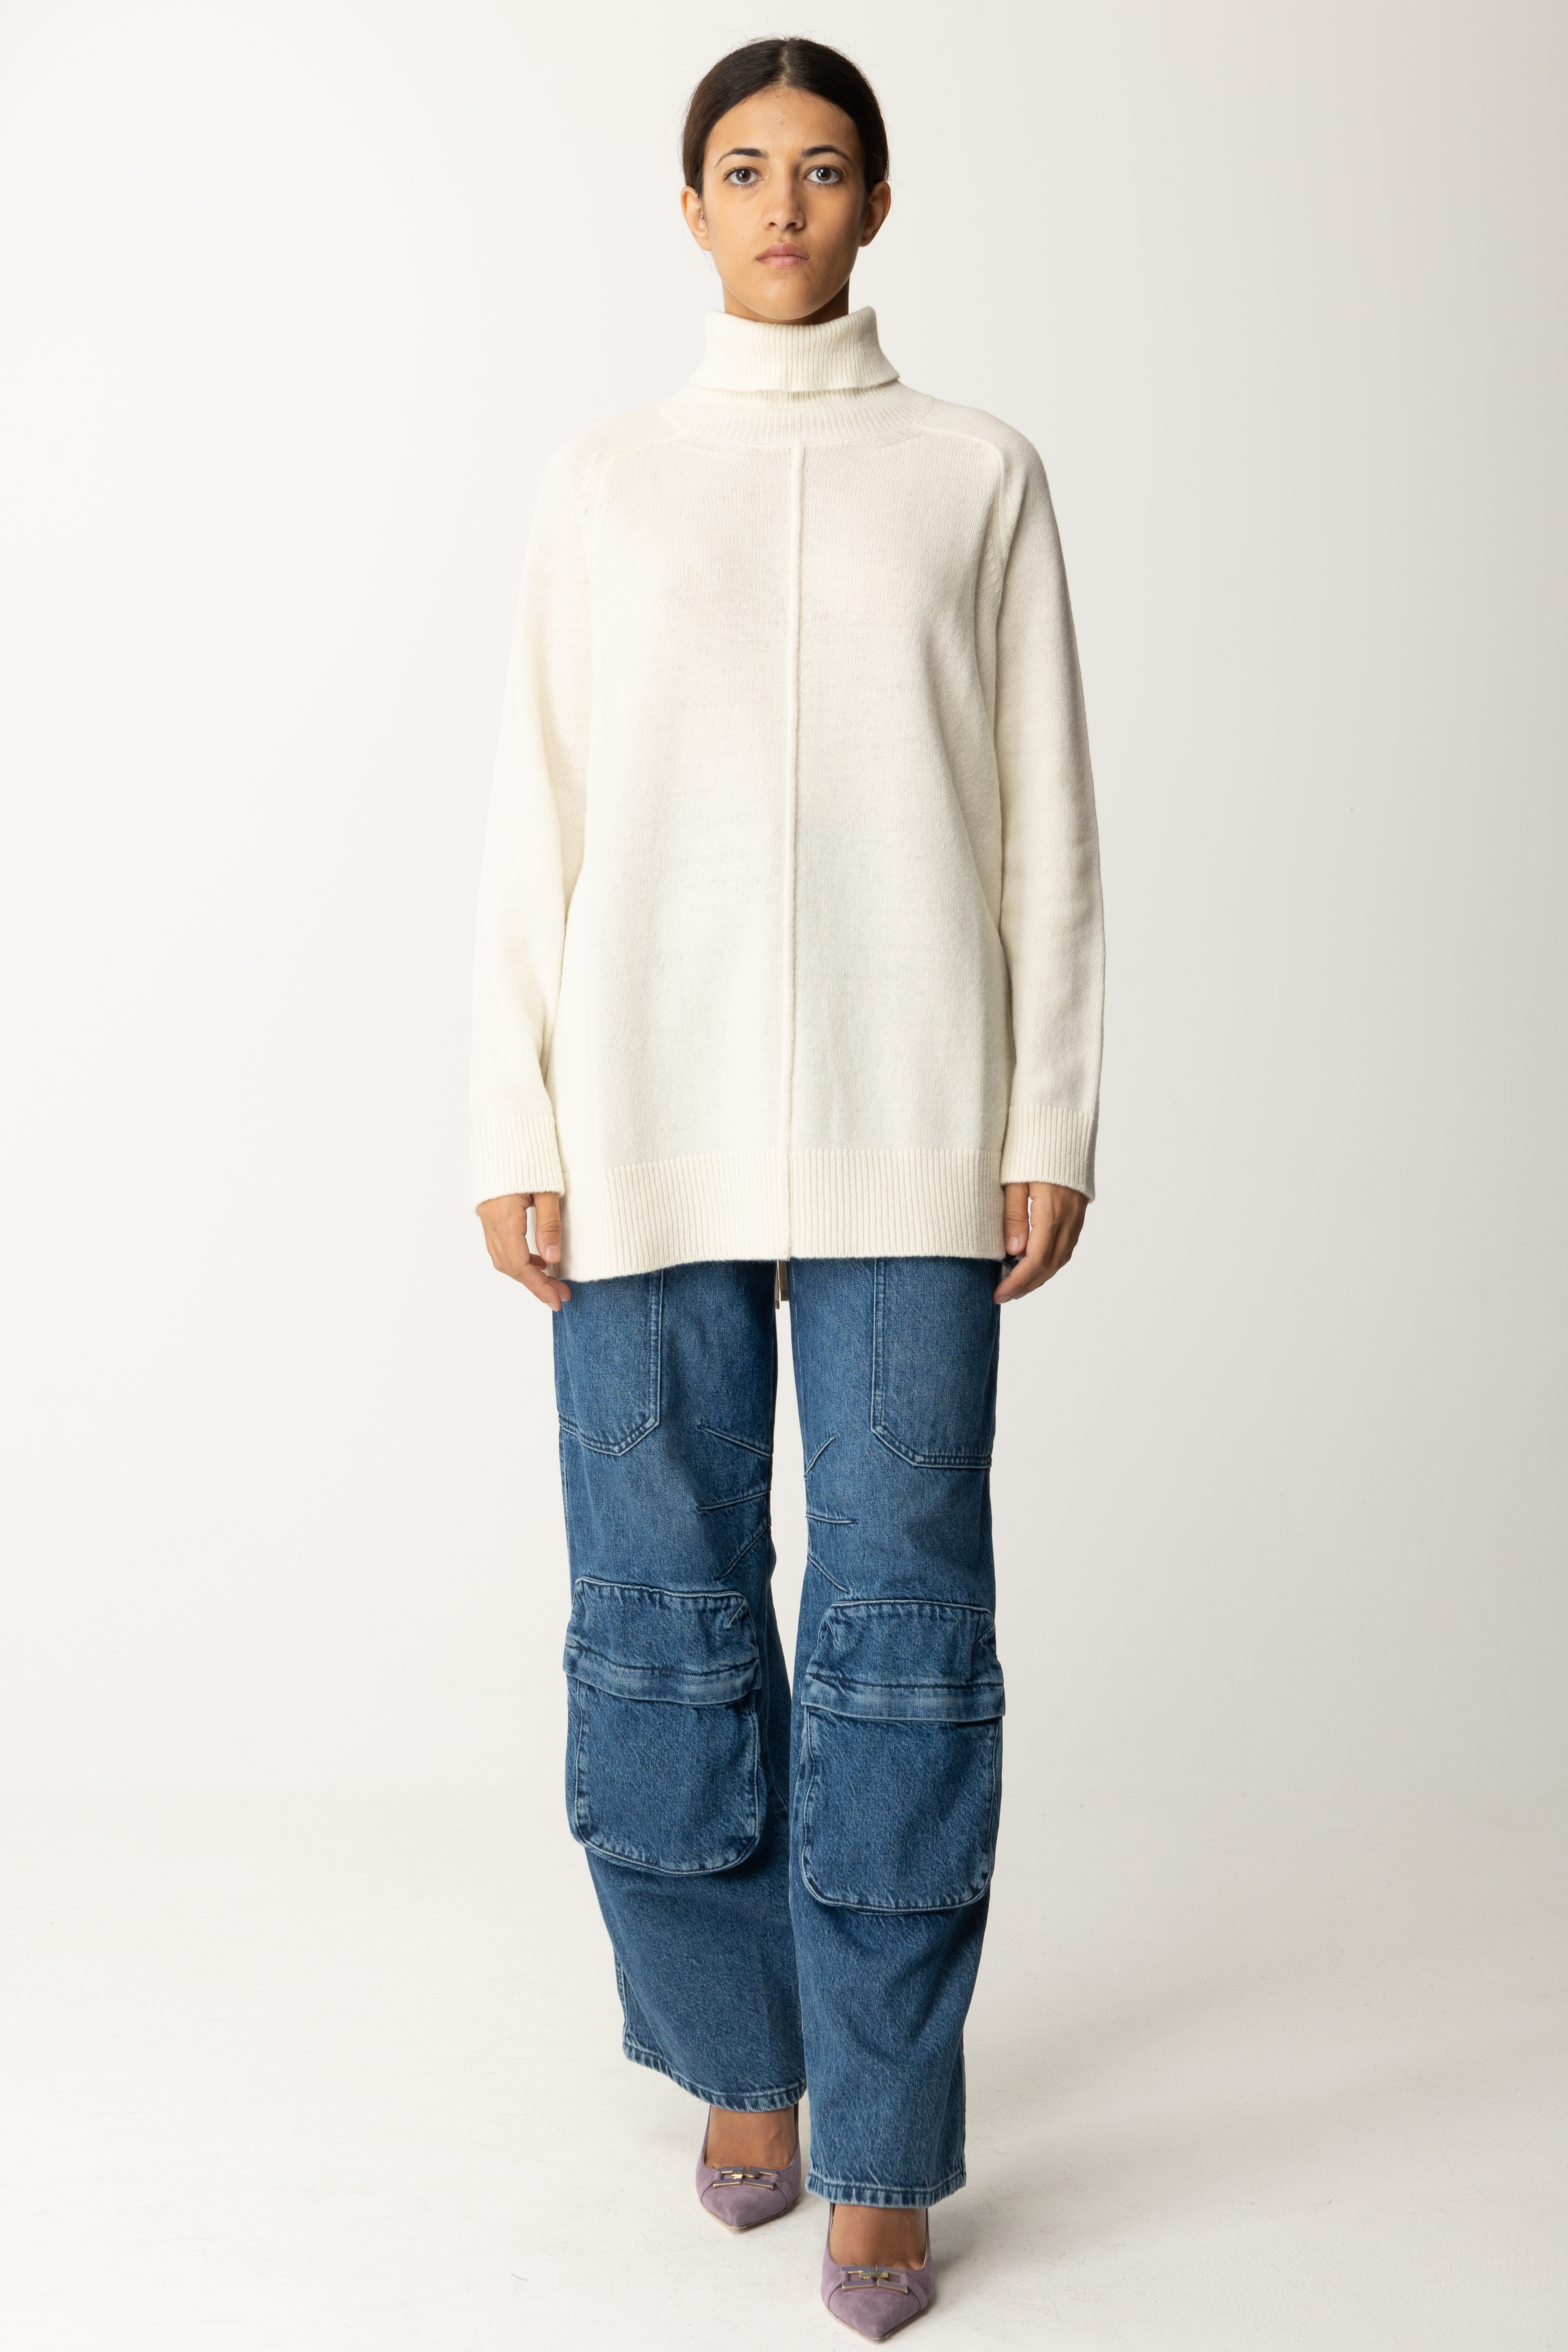 Preview: Semicouture Wool turtleneck with slit on the back MERINGA